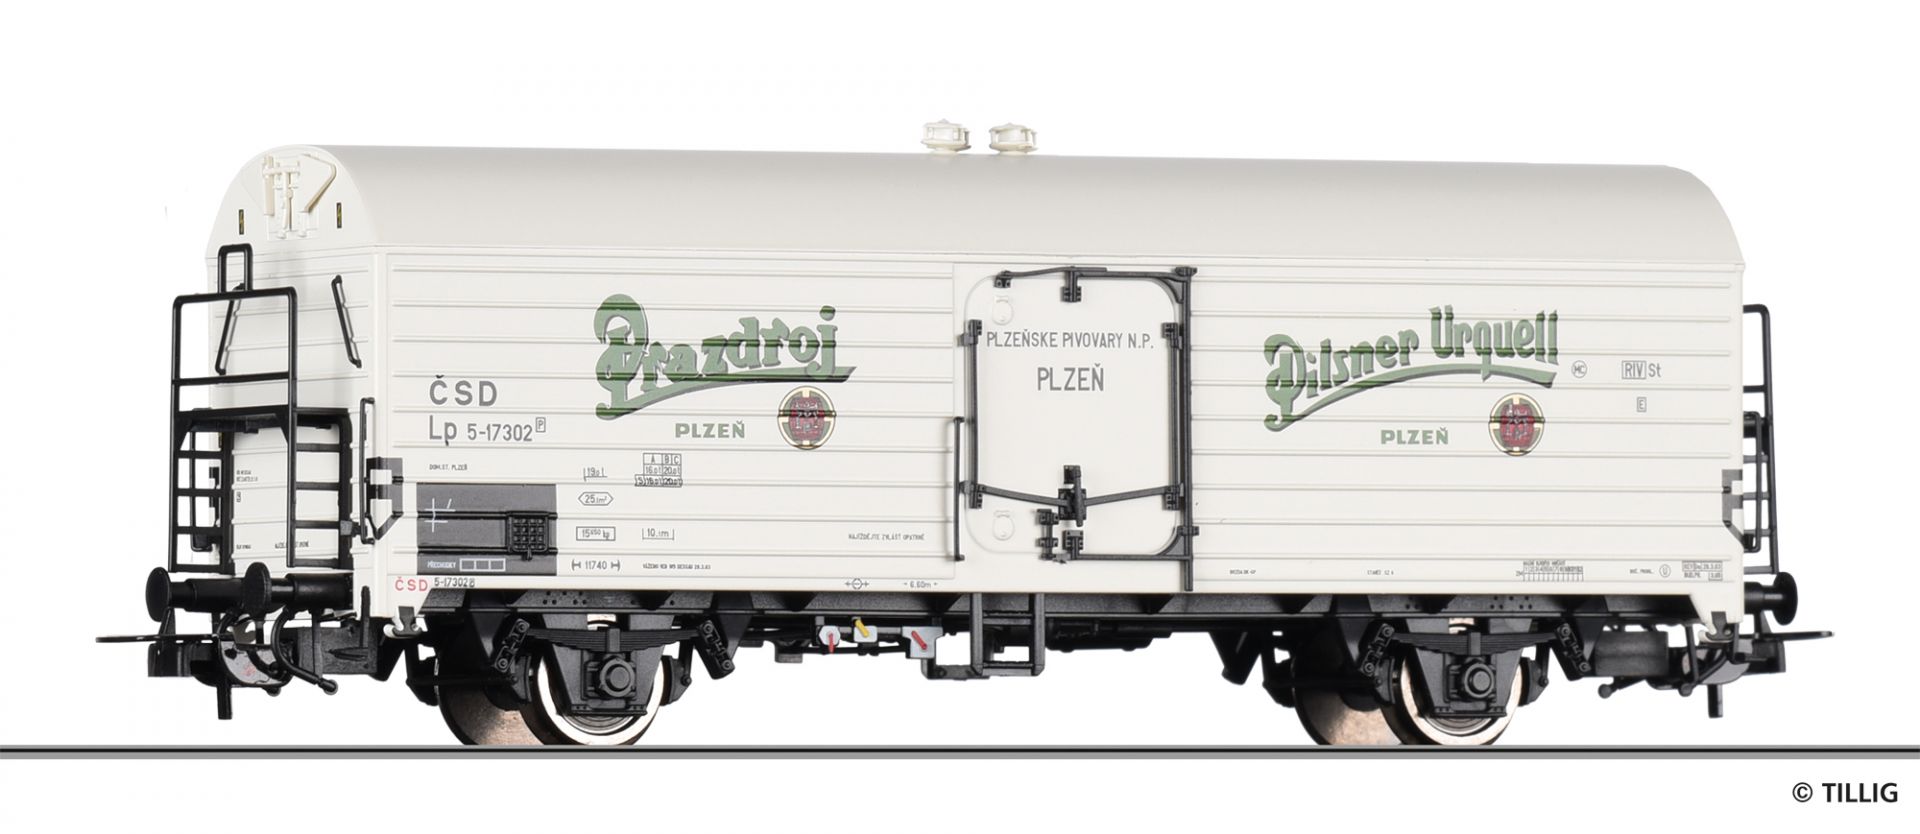 502254 | Refrigerator car CSD -sold out-